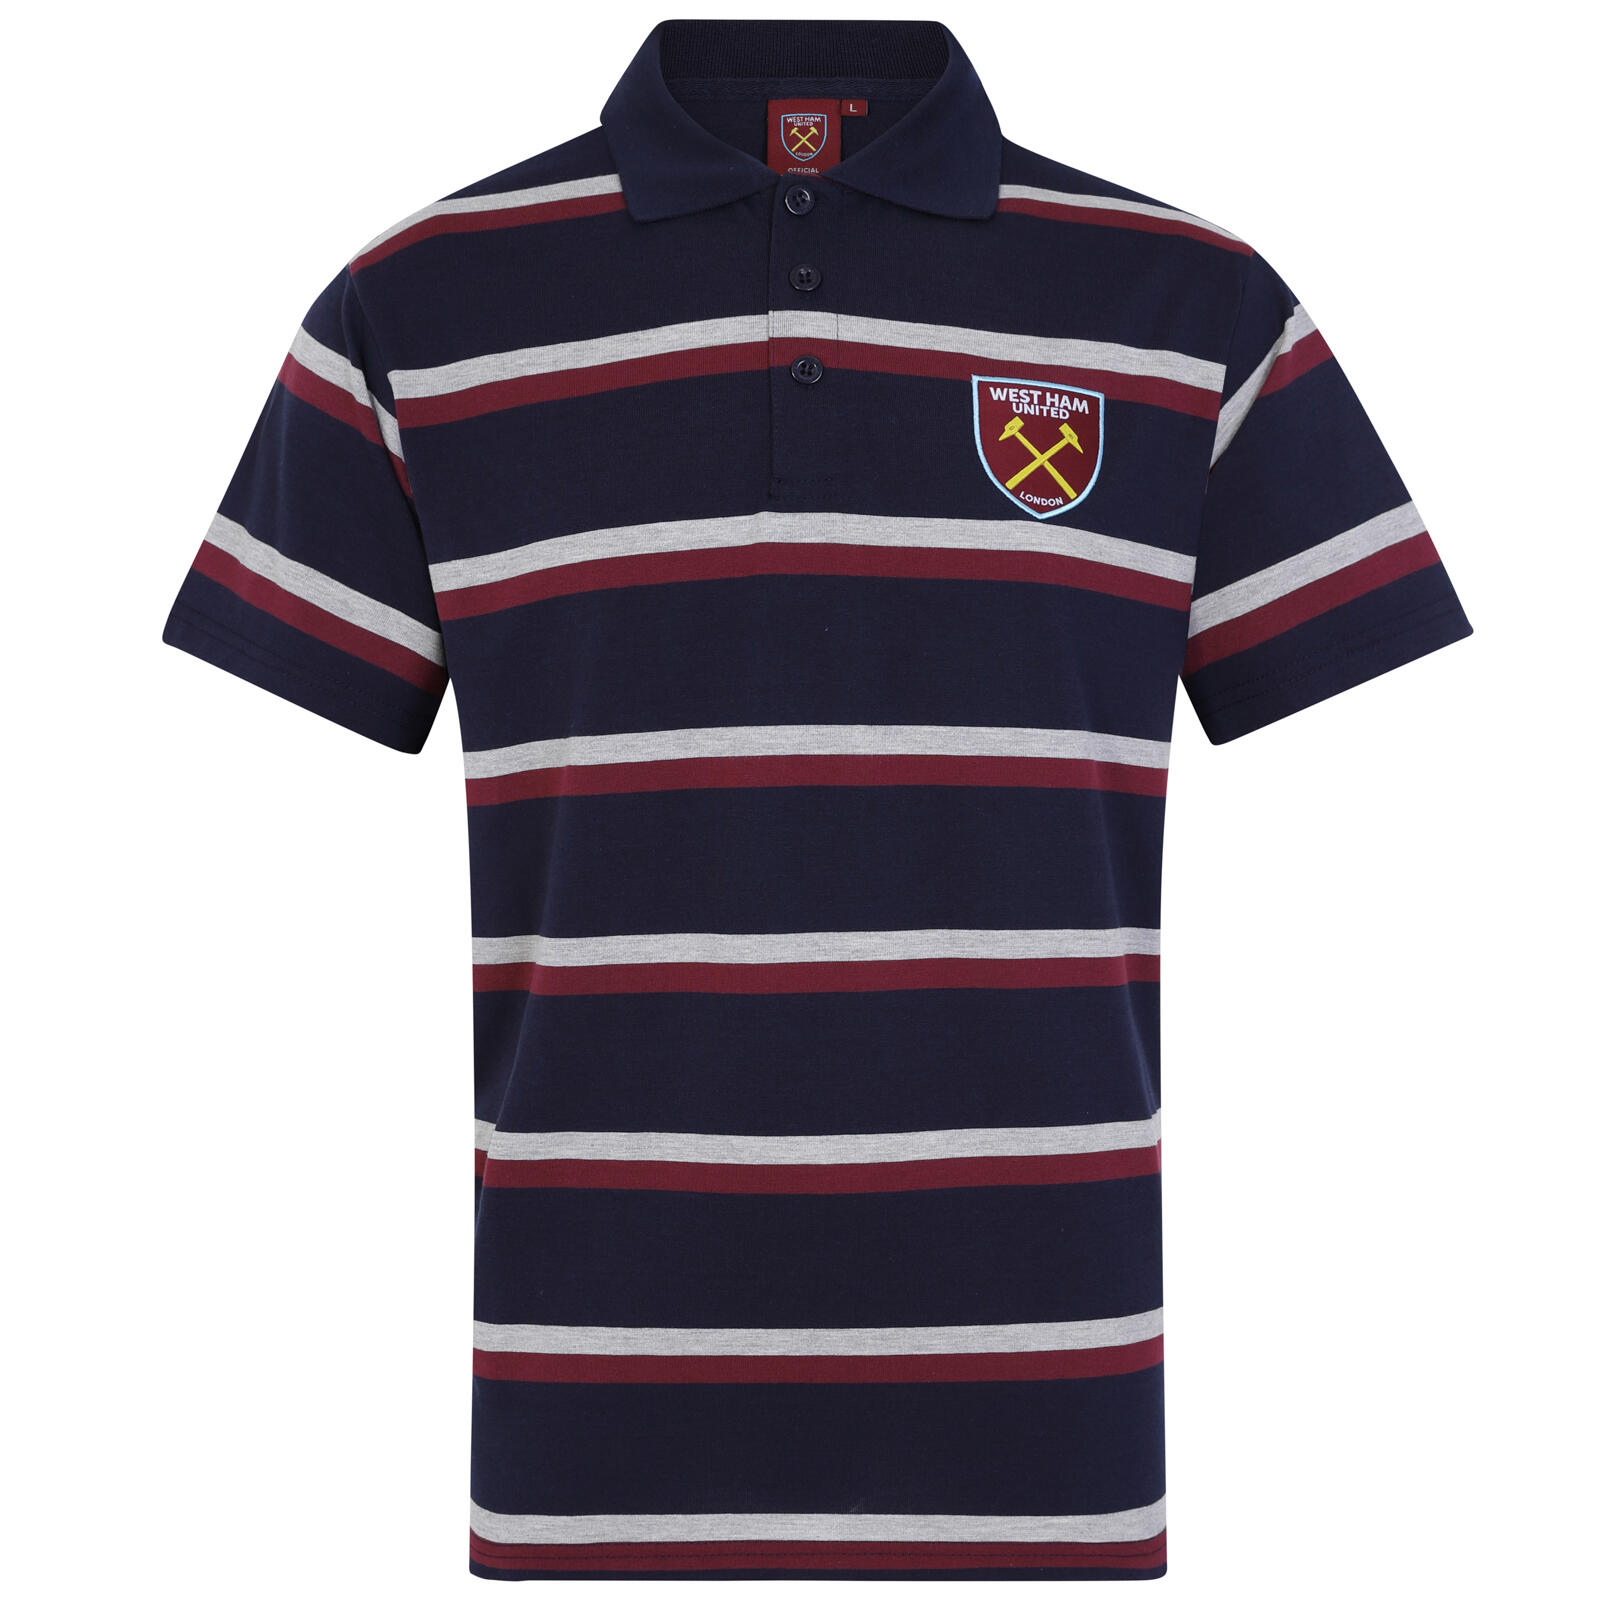 WEST HAM UNITED West Ham United Mens Polo Shirt Striped OFFICIAL Football Gift